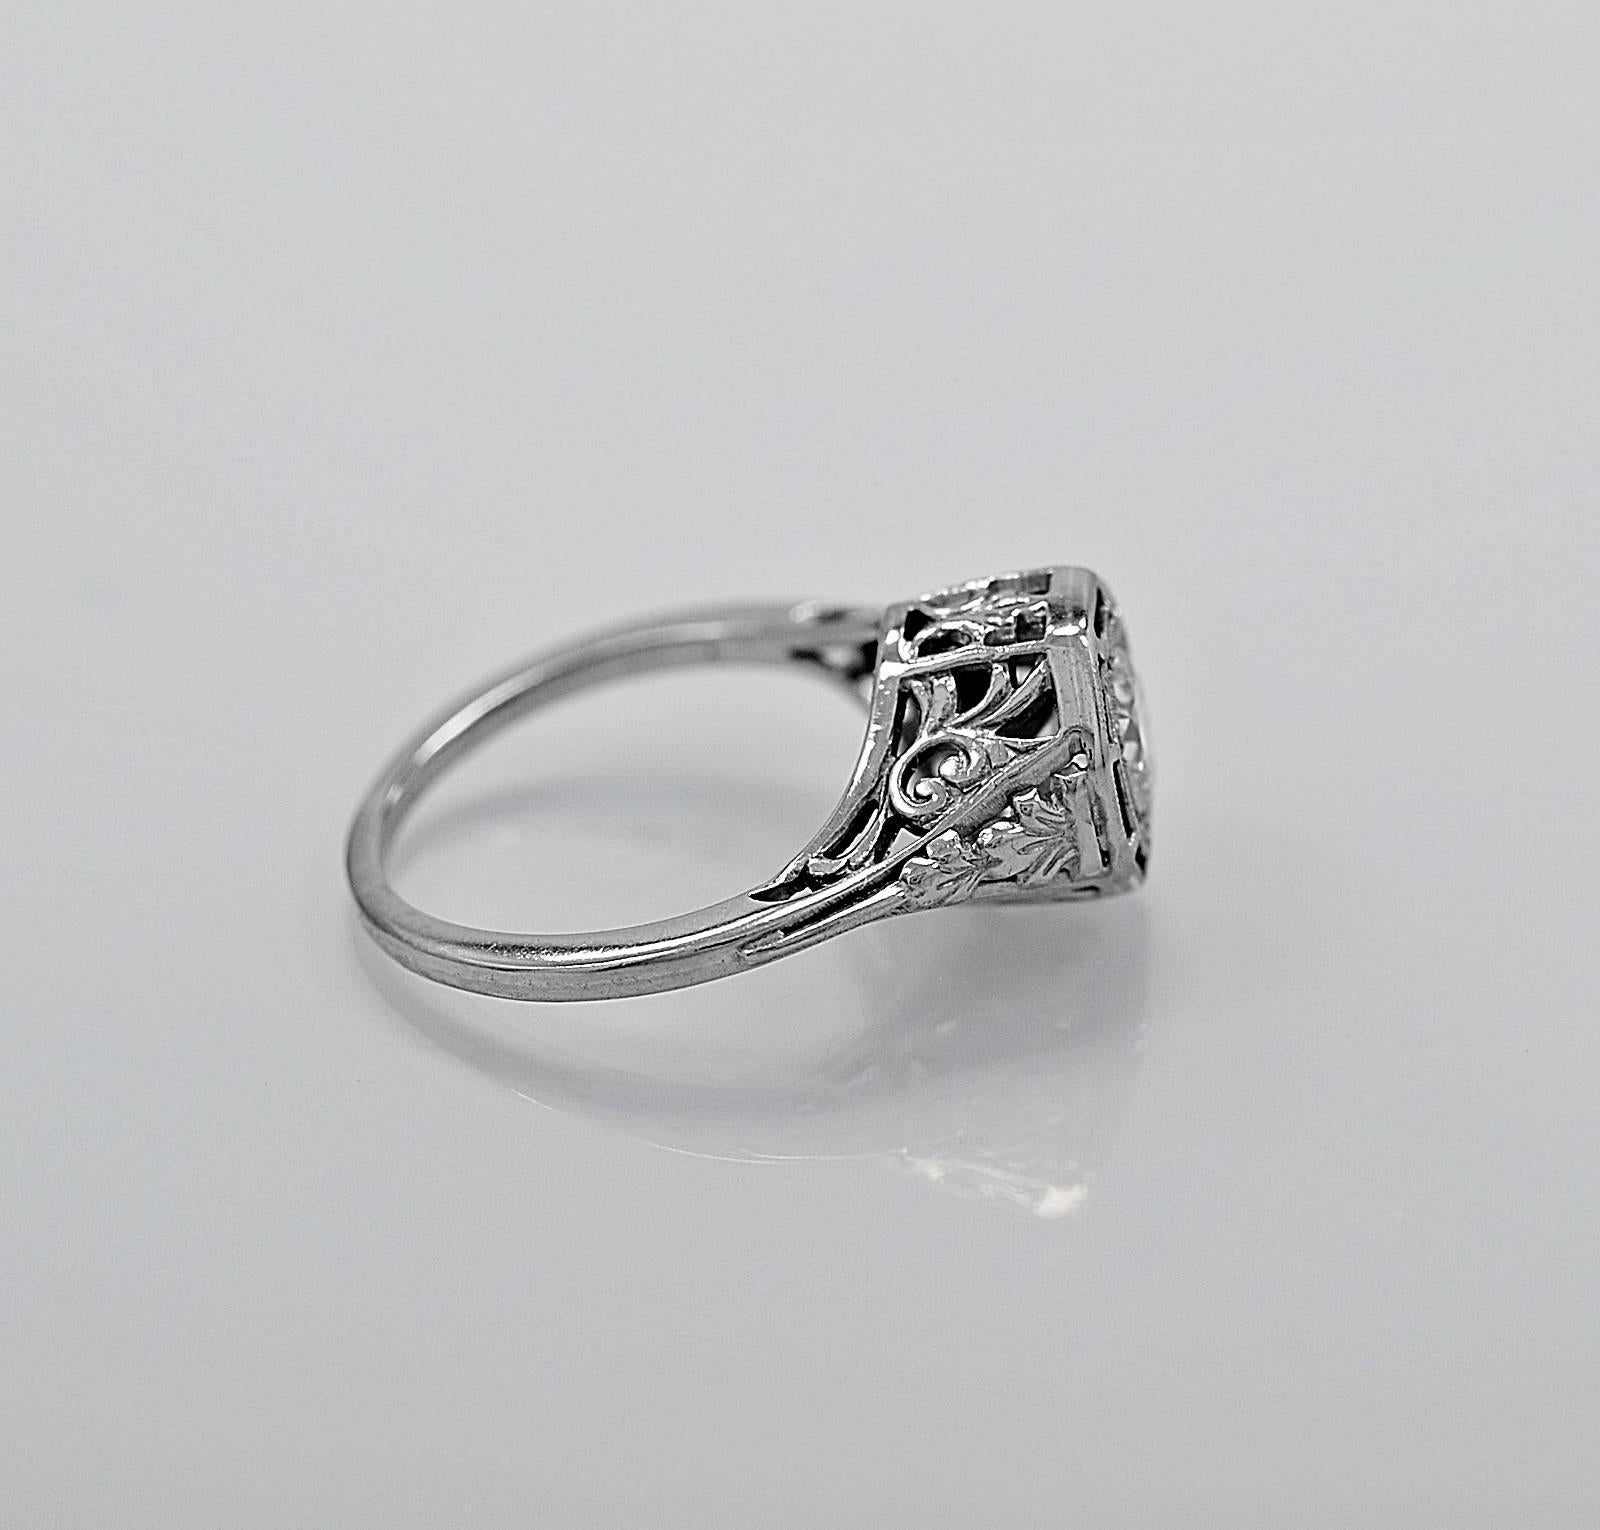 This gorgeous 18K White Gold Art Deco antique engagement ring by 